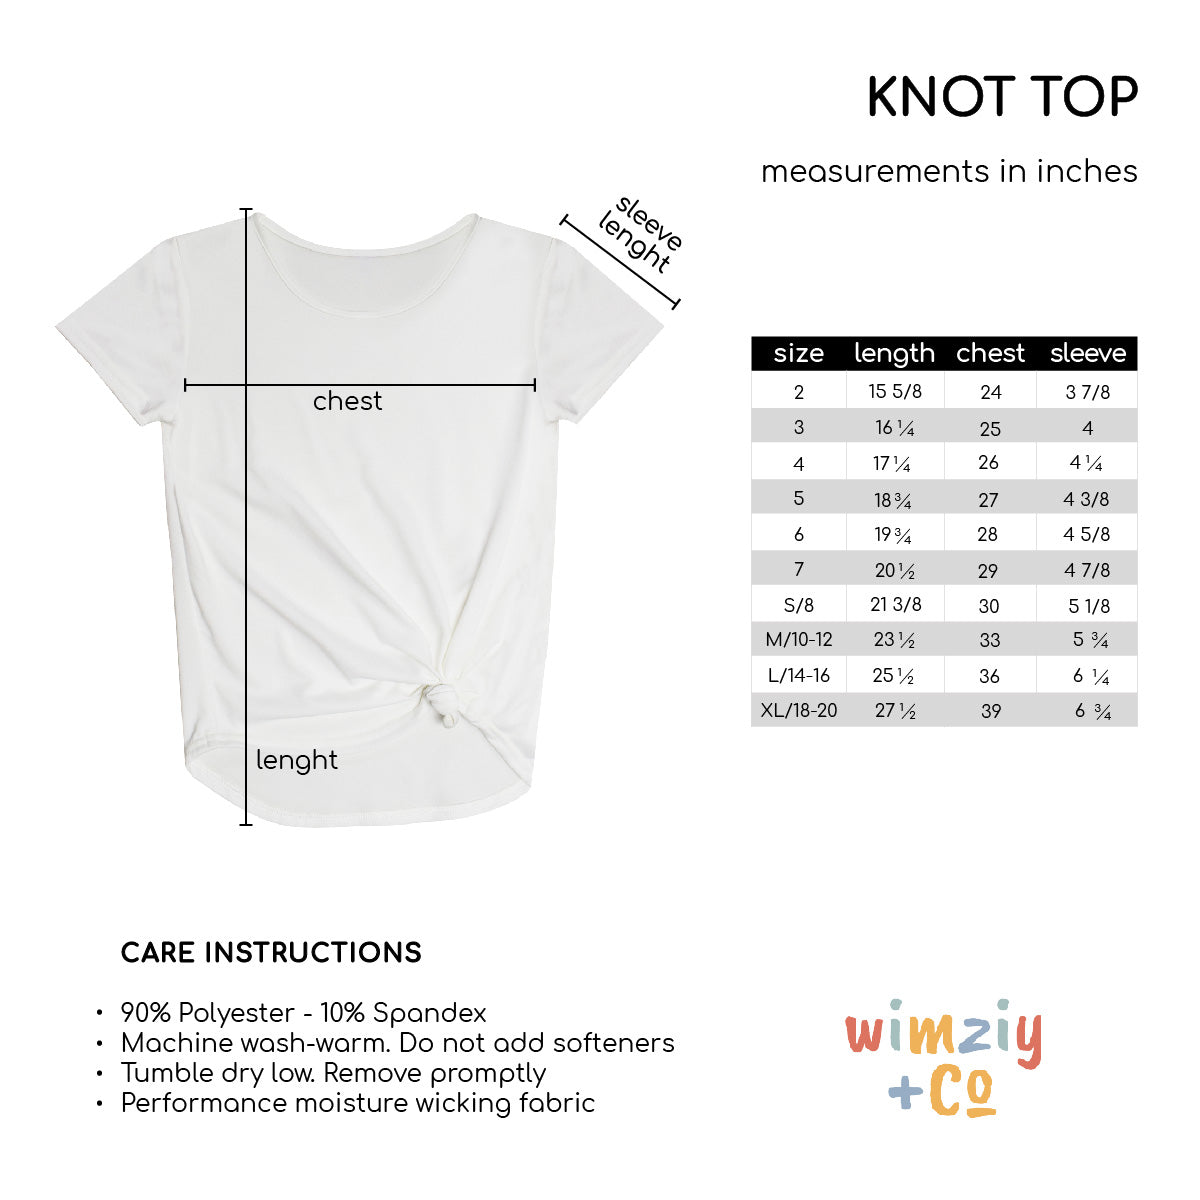 Baseball Personalized Name Black Knot Top - Wimziy&Co.